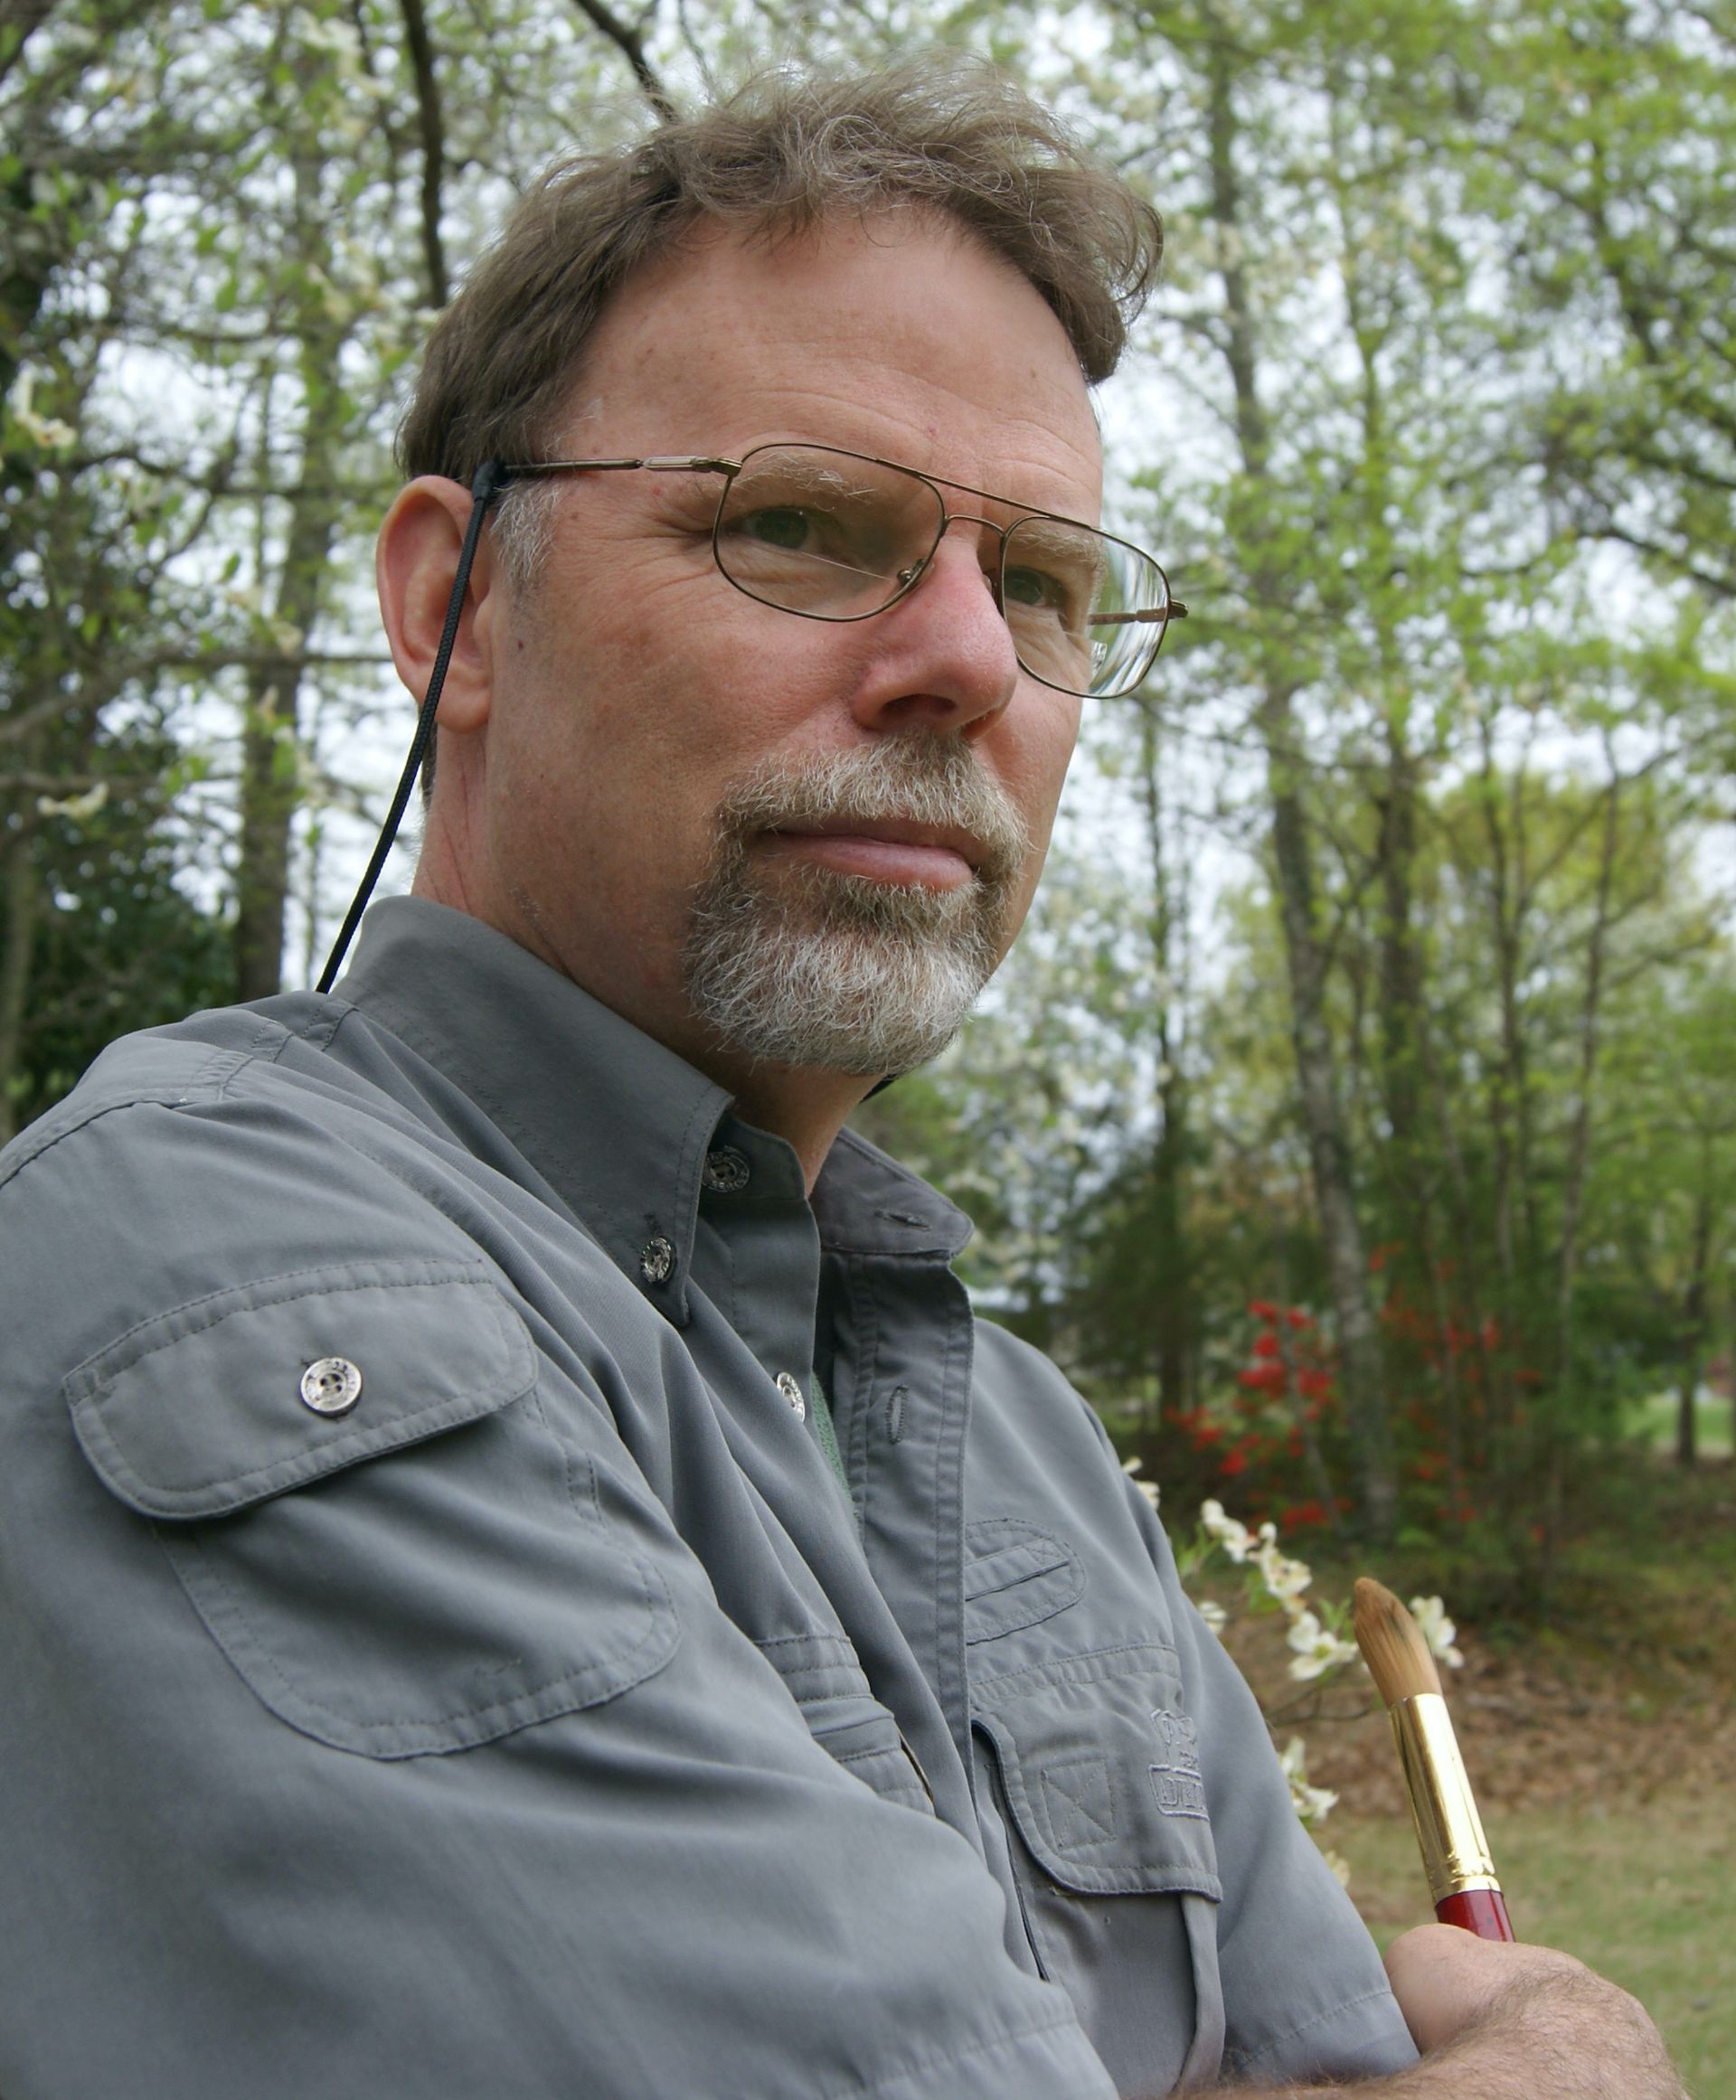 Artist Dr. Russell Jewell with glasses and a beard is holding a brush